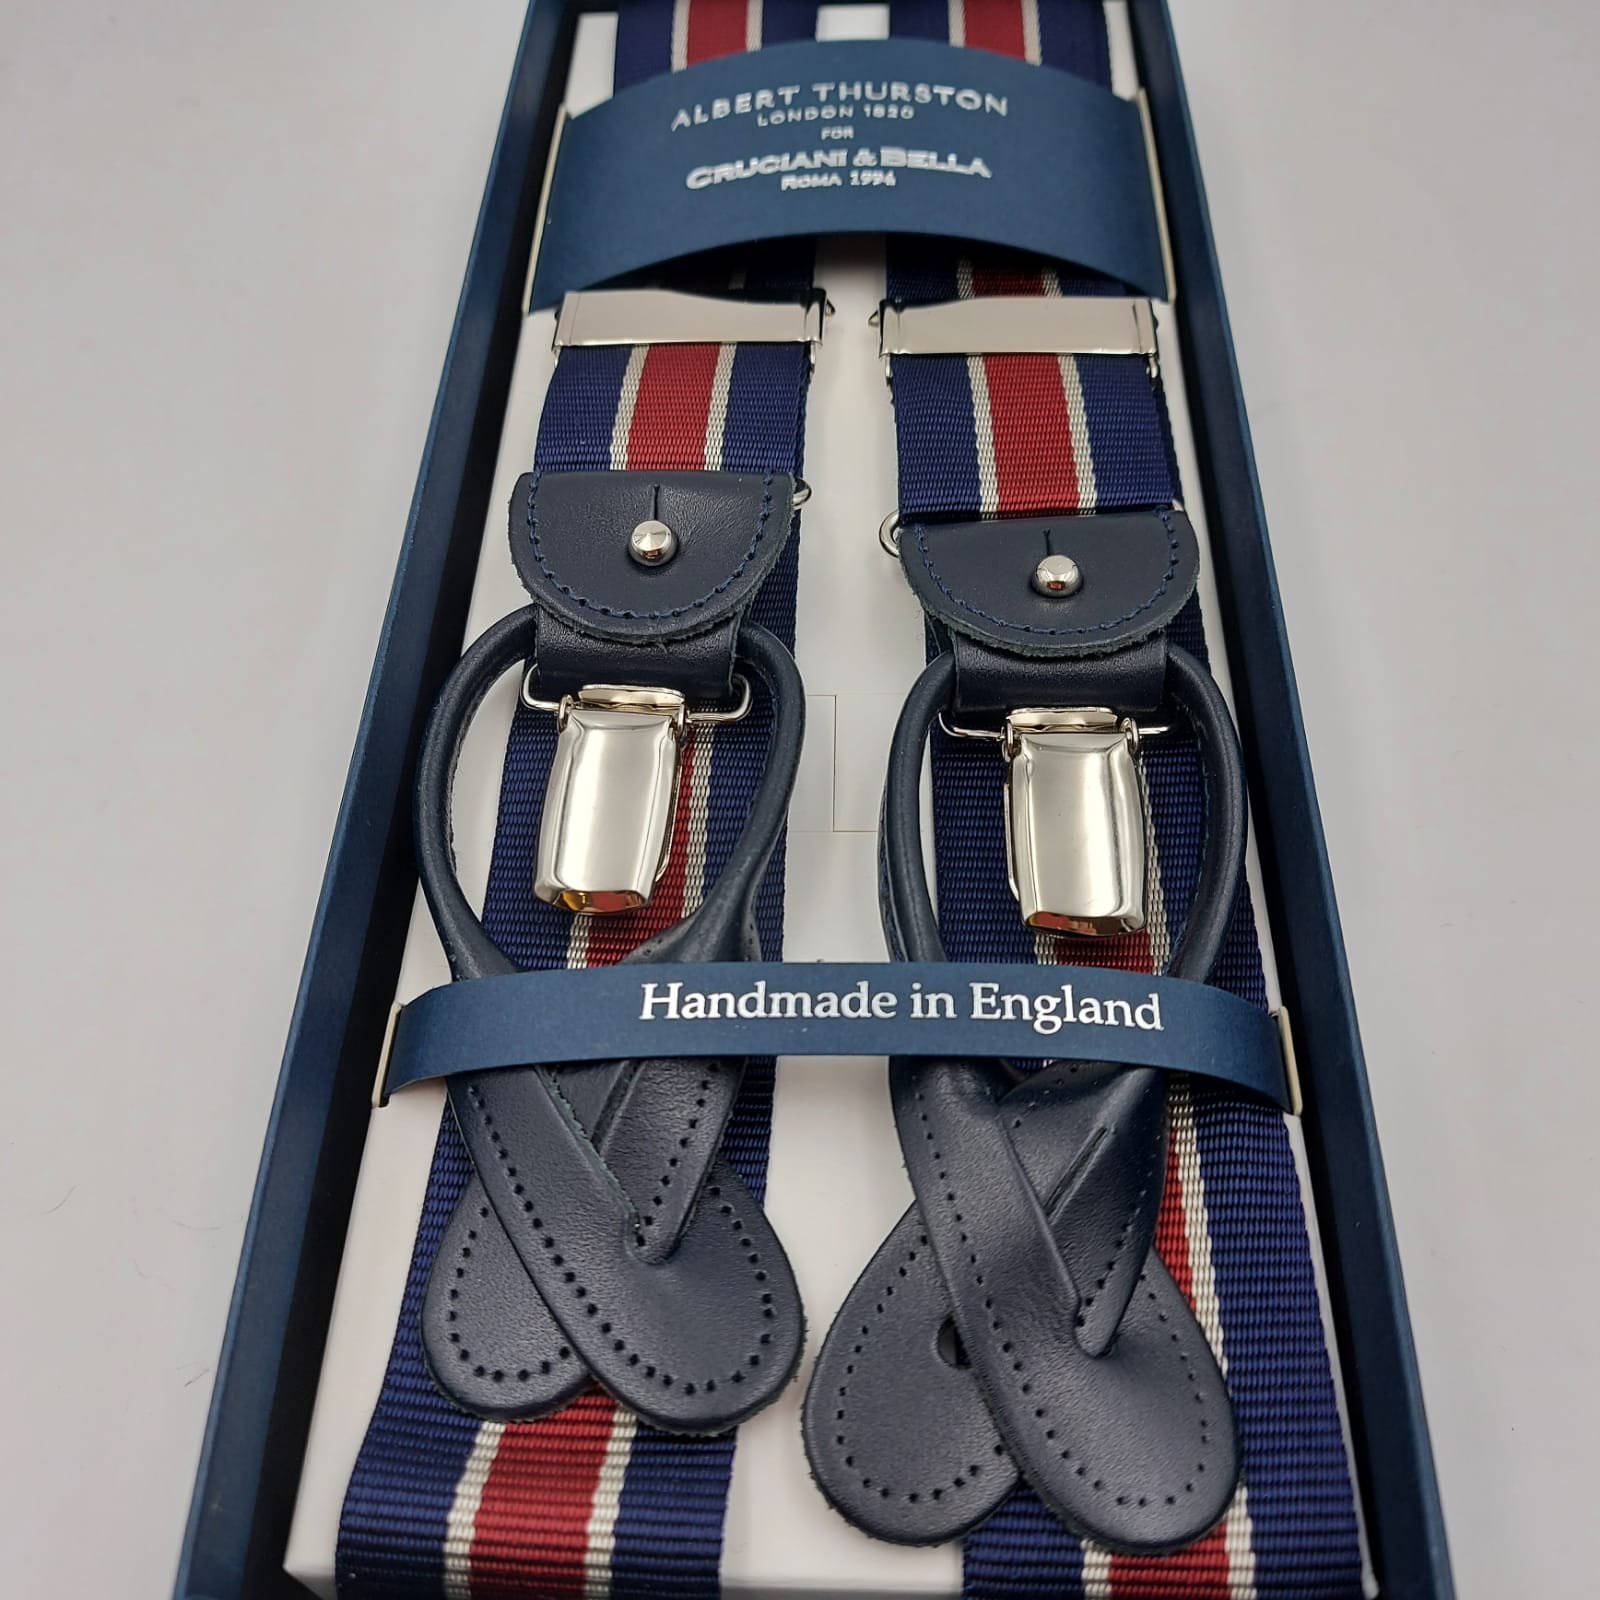 Albert Thurston for Cruciani & Bella Made in England Adjustable Sizing 30 mm Woven Barathea  Blue ,Wine and White Stripes Braces 2 in 1 Y-Shaped Nickel Fittings Size: L 6243 